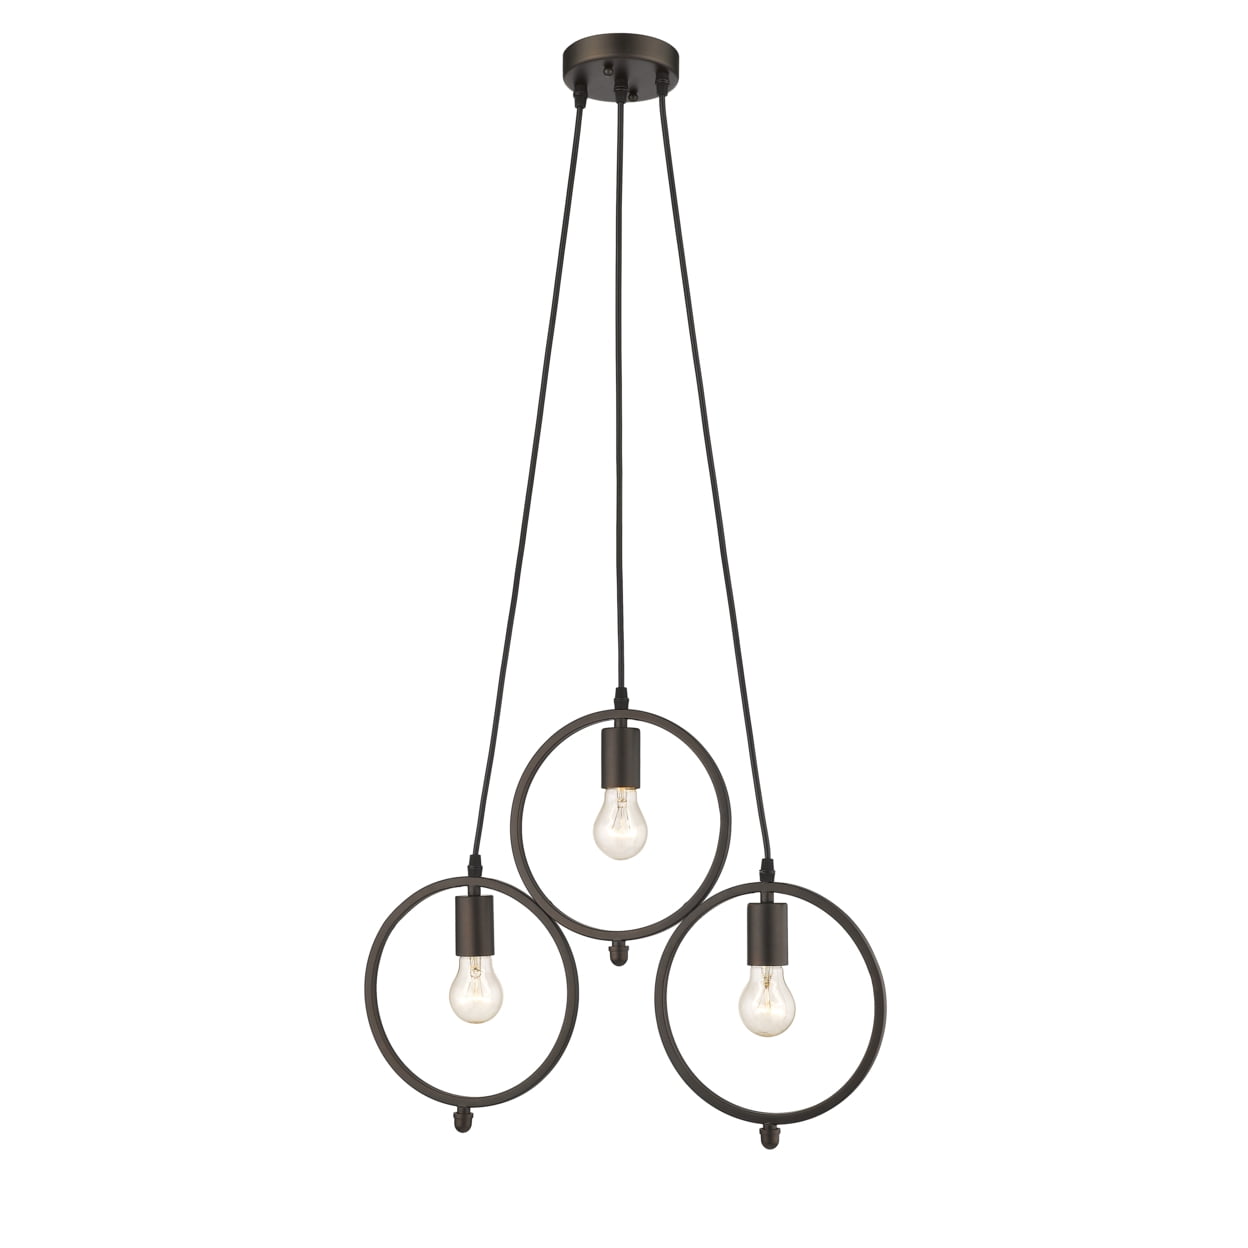 Ch2d005rb22-dp3 Ironclad Industrial 3 Light Rubbed Bronze Ceiling Pendant - 21.5 In.